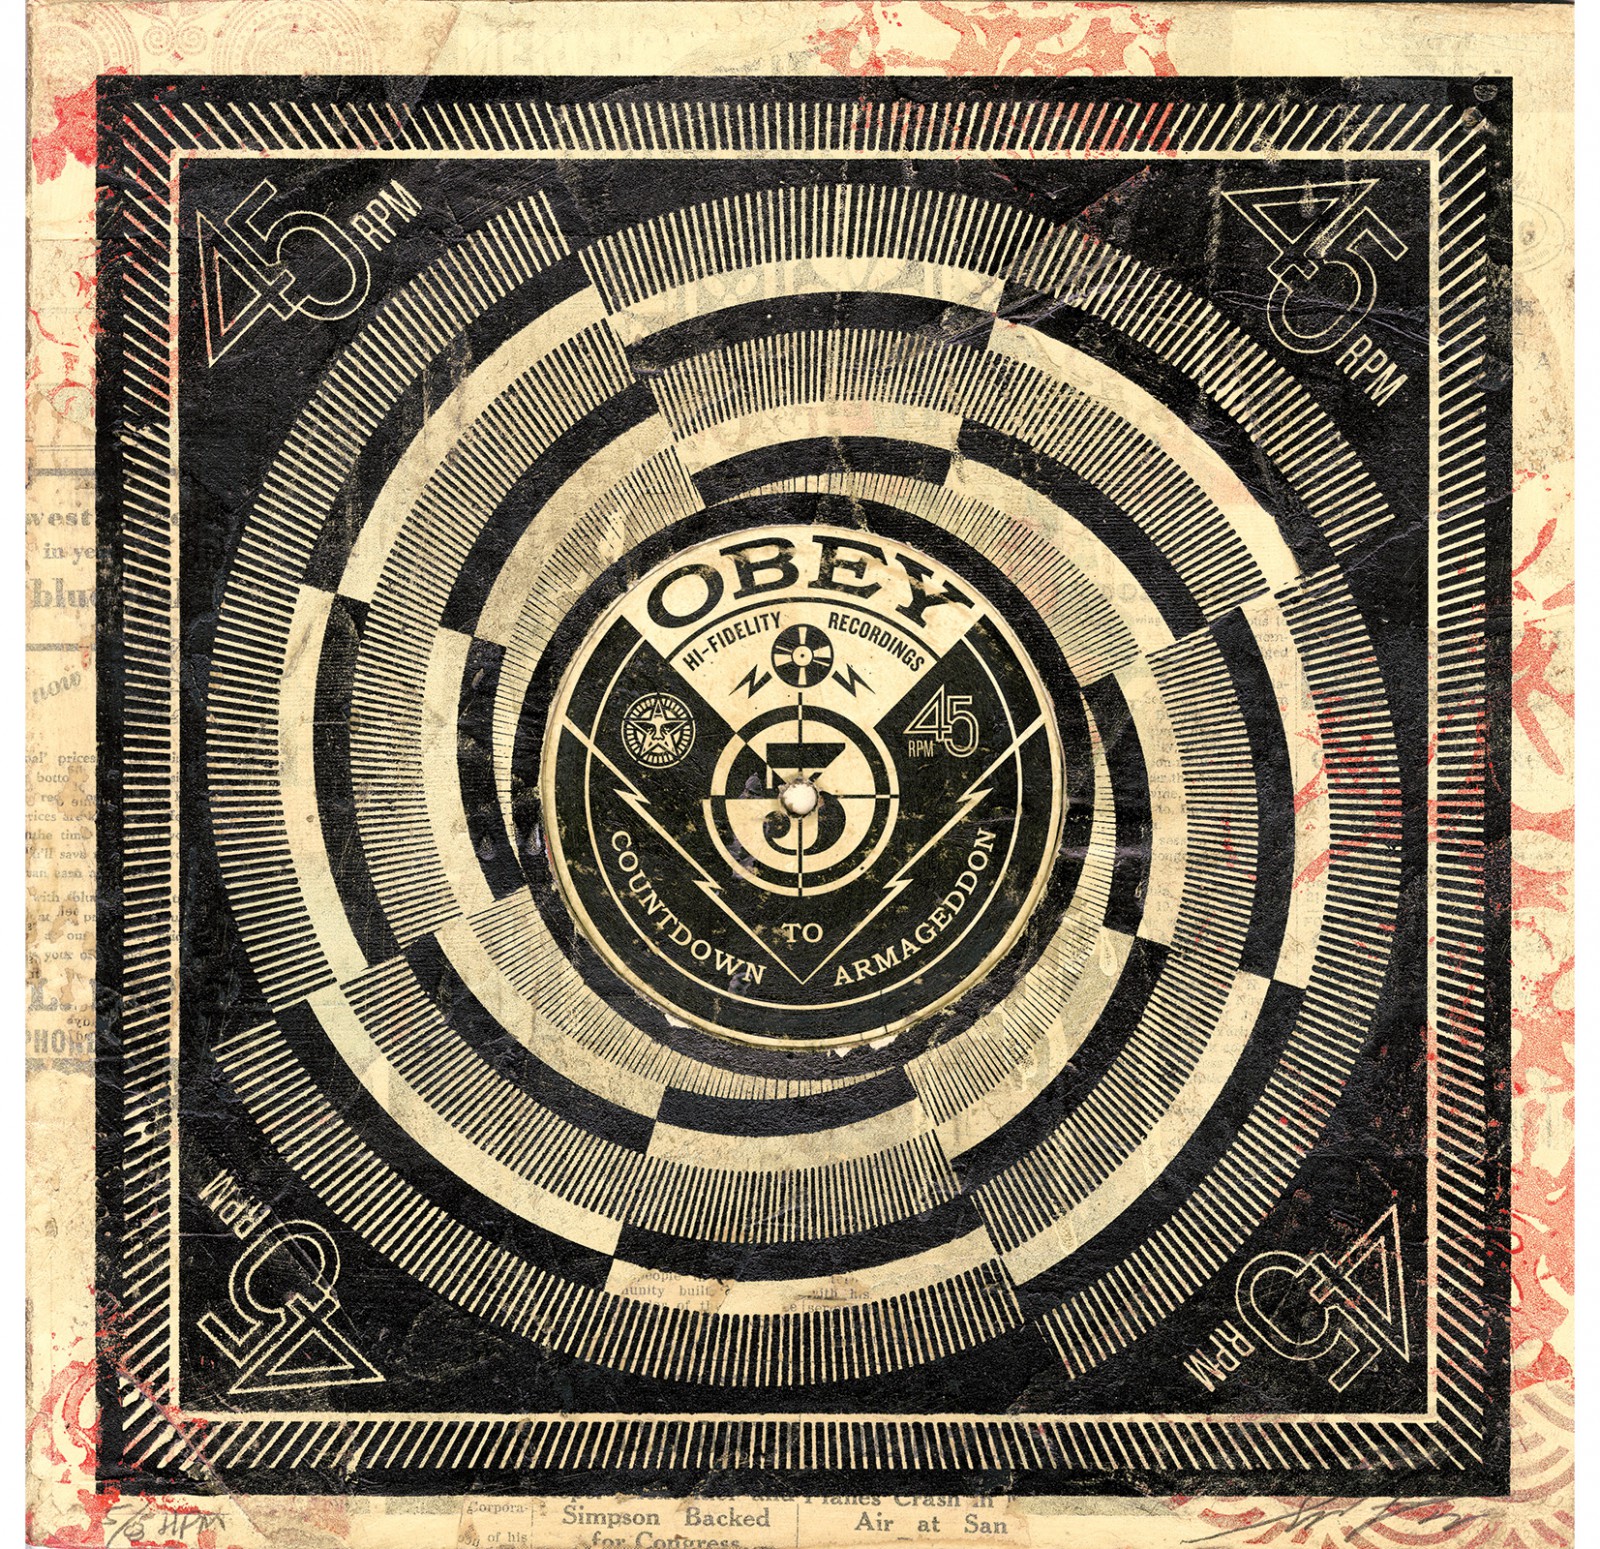 Countdown to Armageddon HPM on Album Cover - Obey Giant